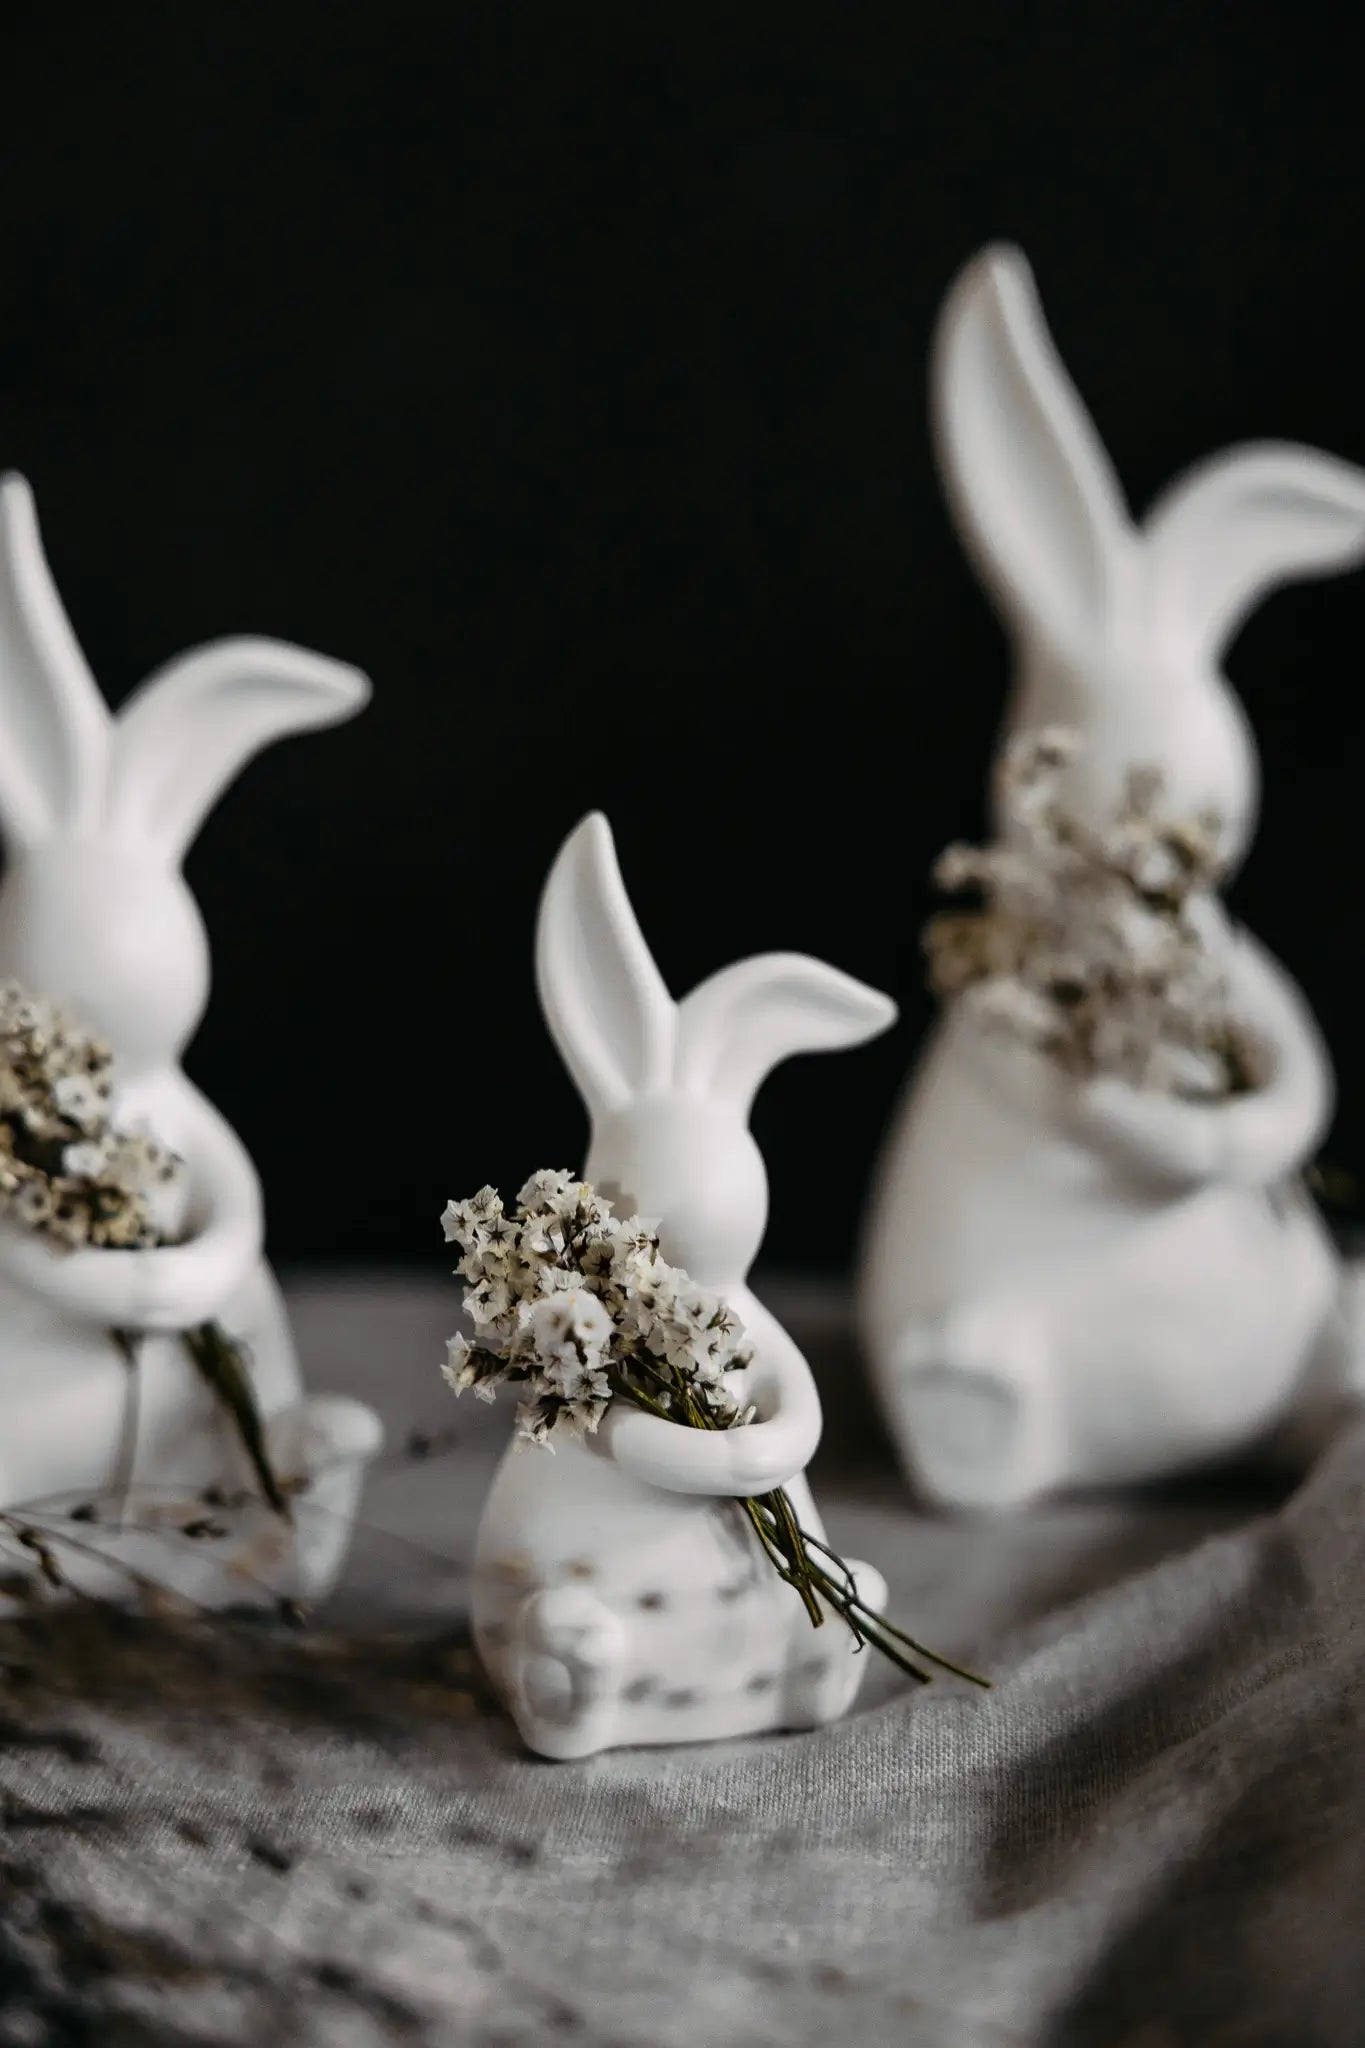 Ceramic Bunny with Open Arms - Elias | White | by Storefactory - Lifestory